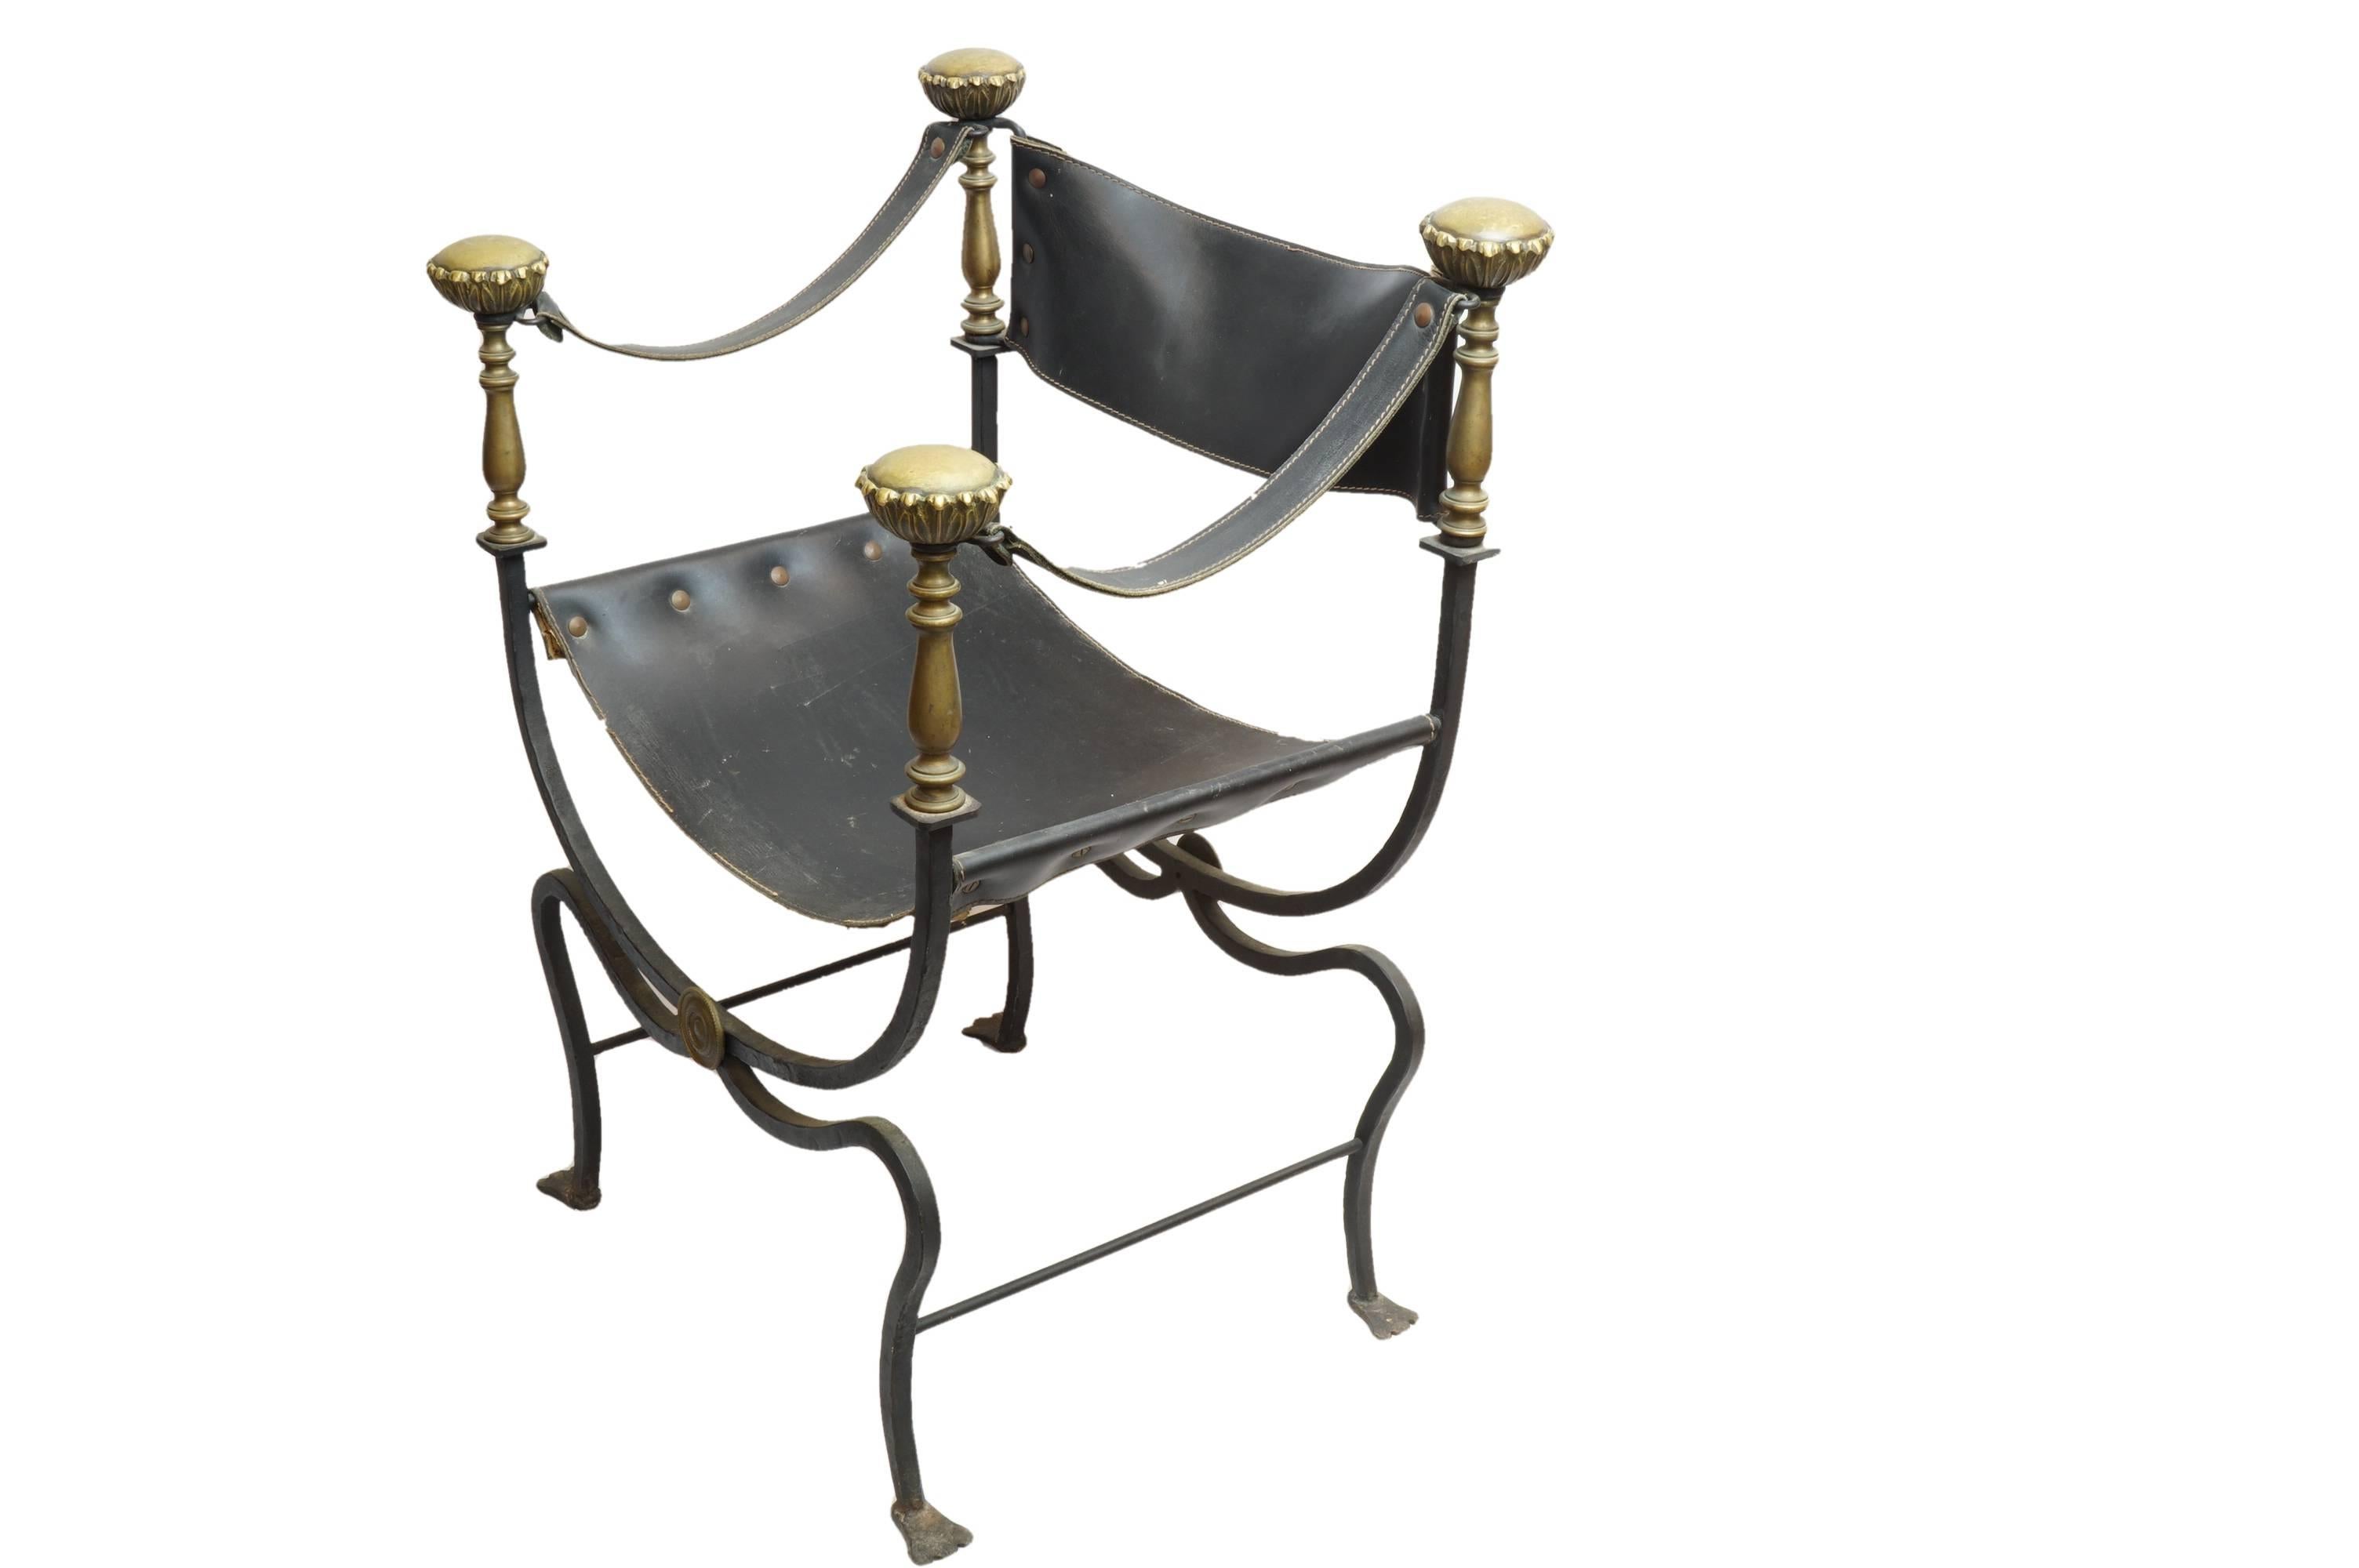 19th century pair of campaign chairs with leather seats, arms and back. Chairs feature wrought iron bases leading to bronze details and feet, with large bronze floral medallions crowning the armrests. Regal yet simplistic, this storied pair will